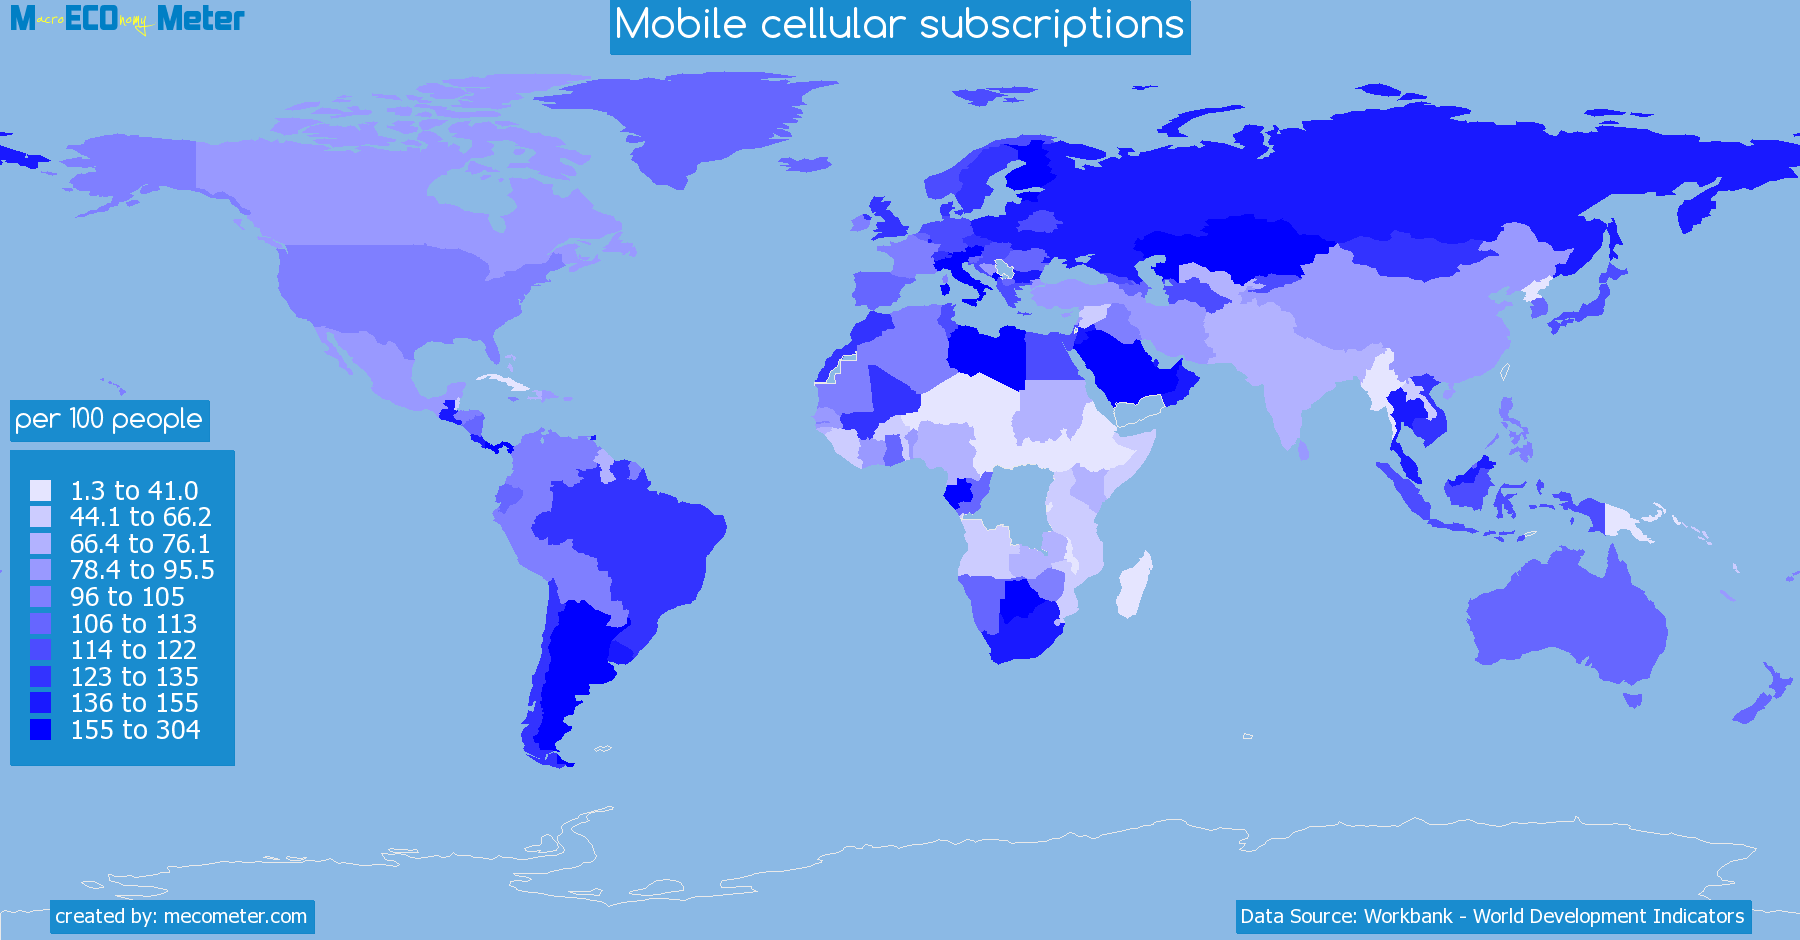 Worldmap of all countries colored to reflect the values of Mobile cellular subscriptions